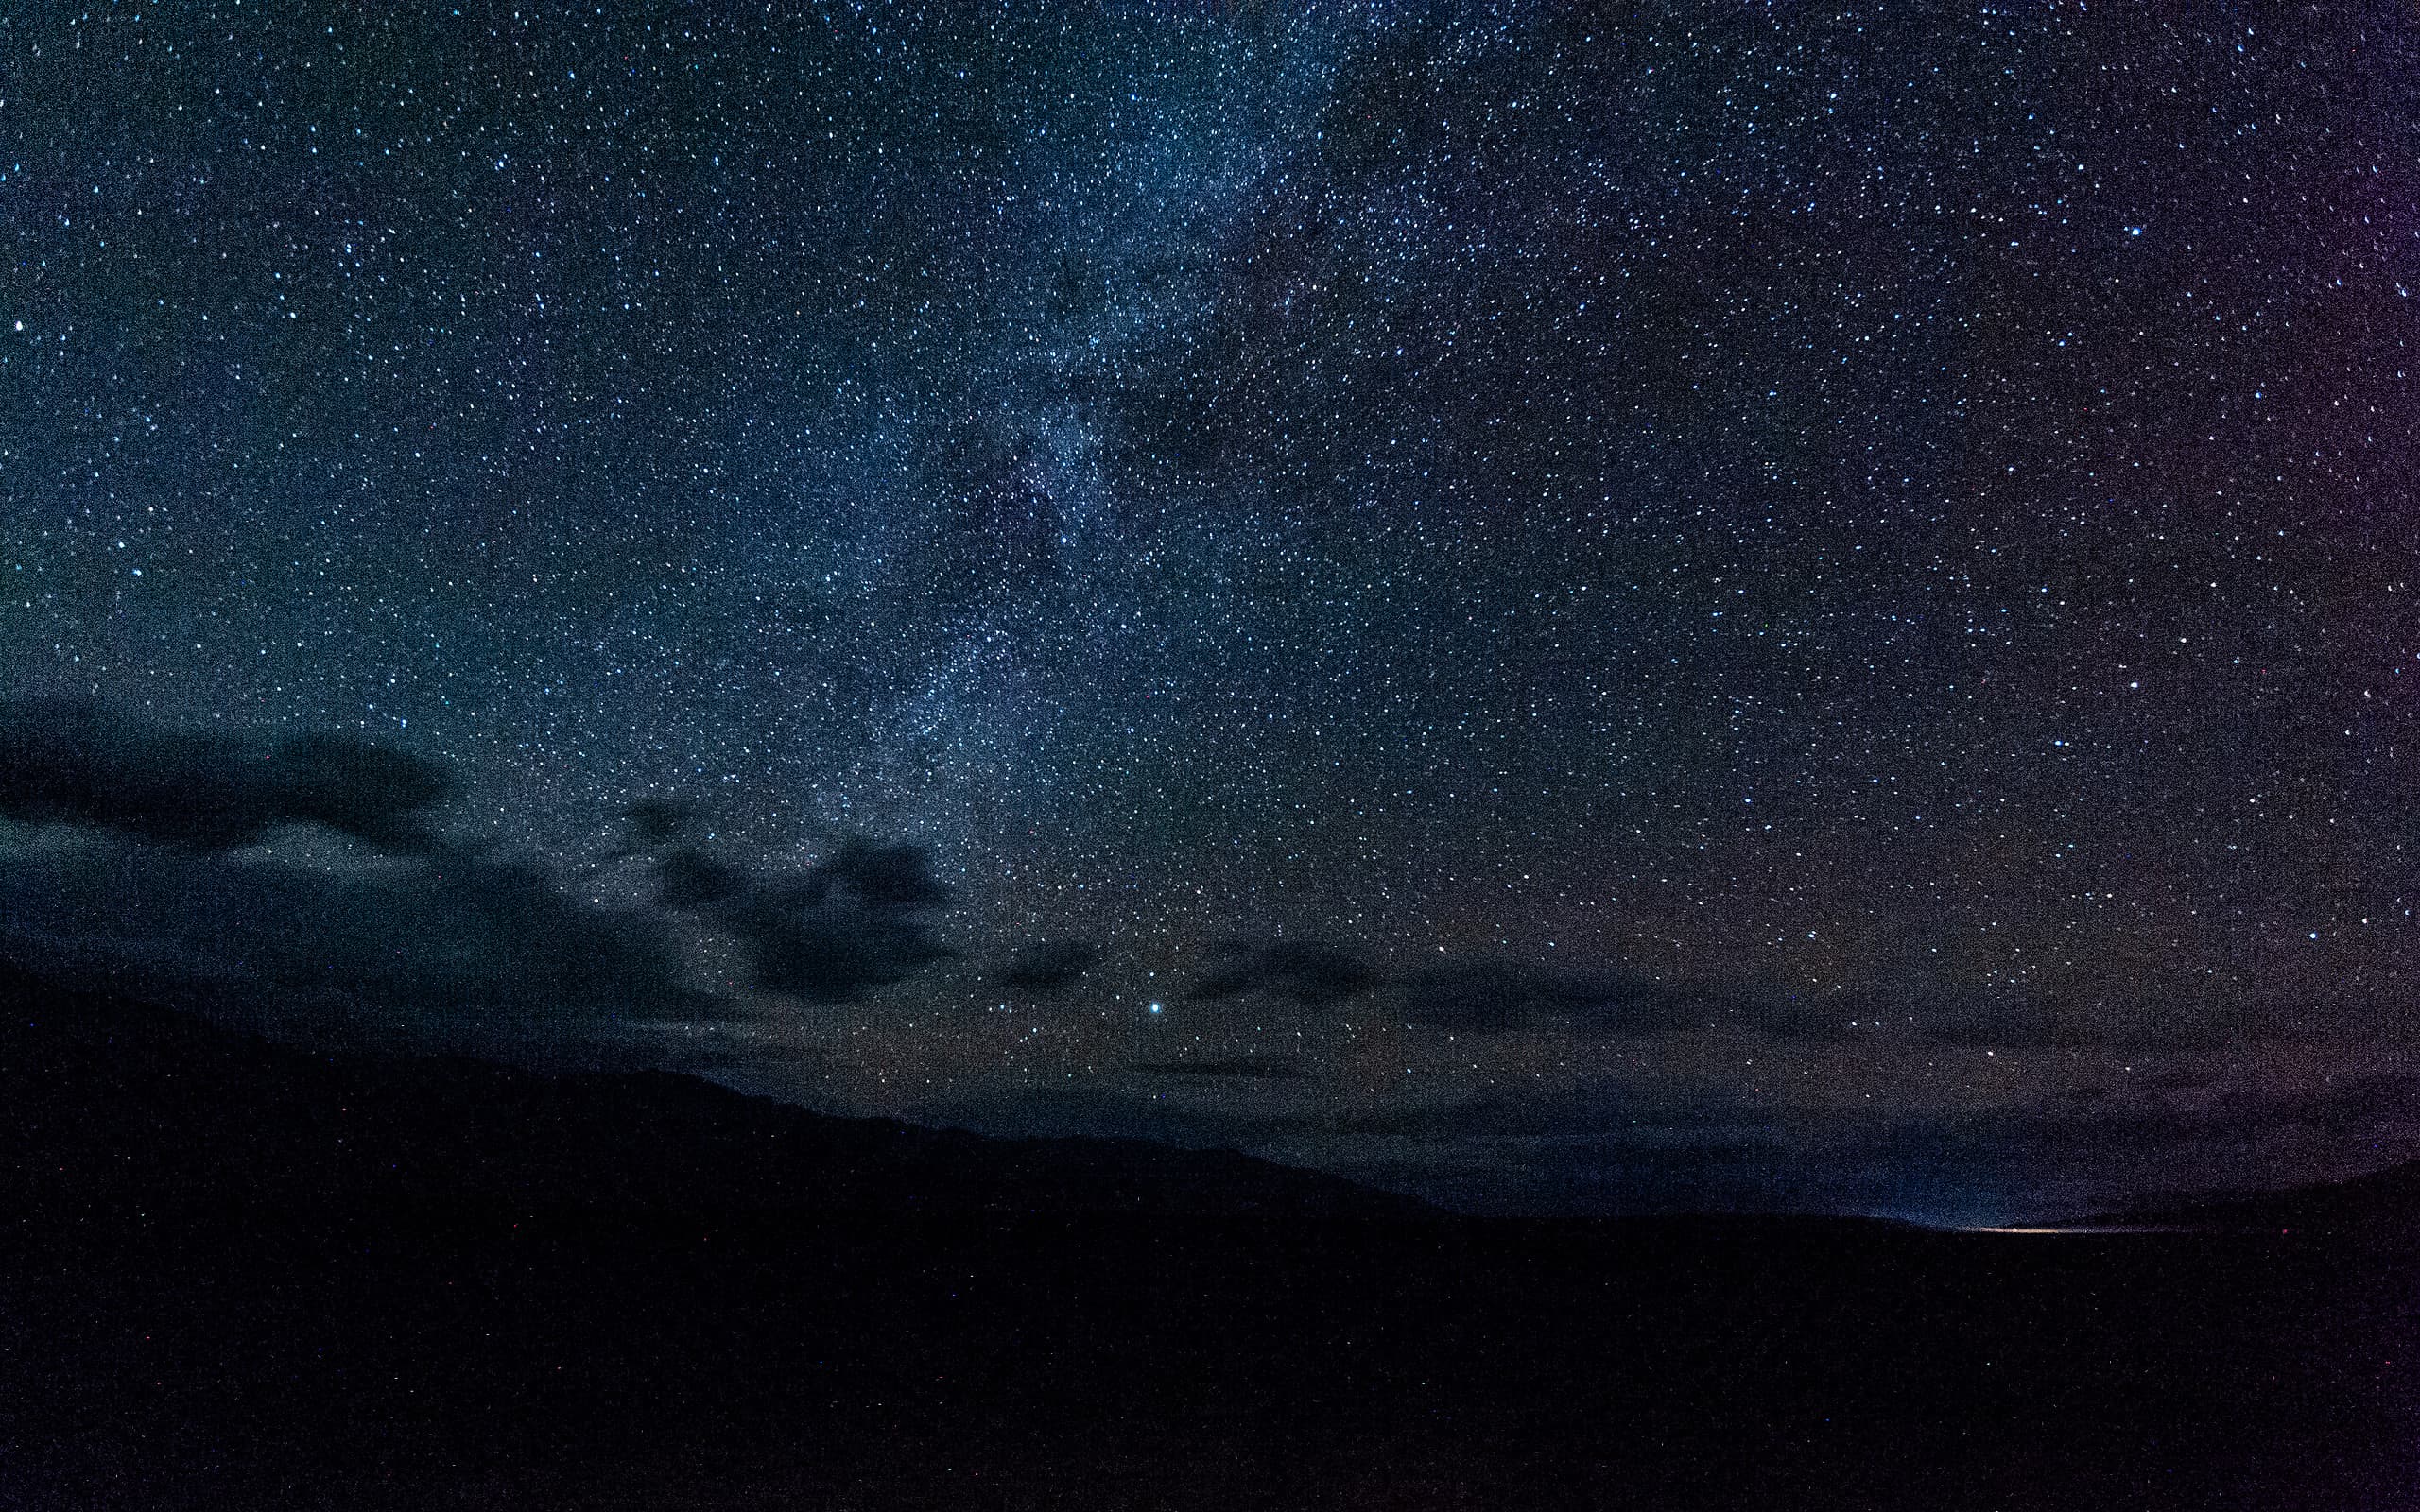 Night Sky over death valley